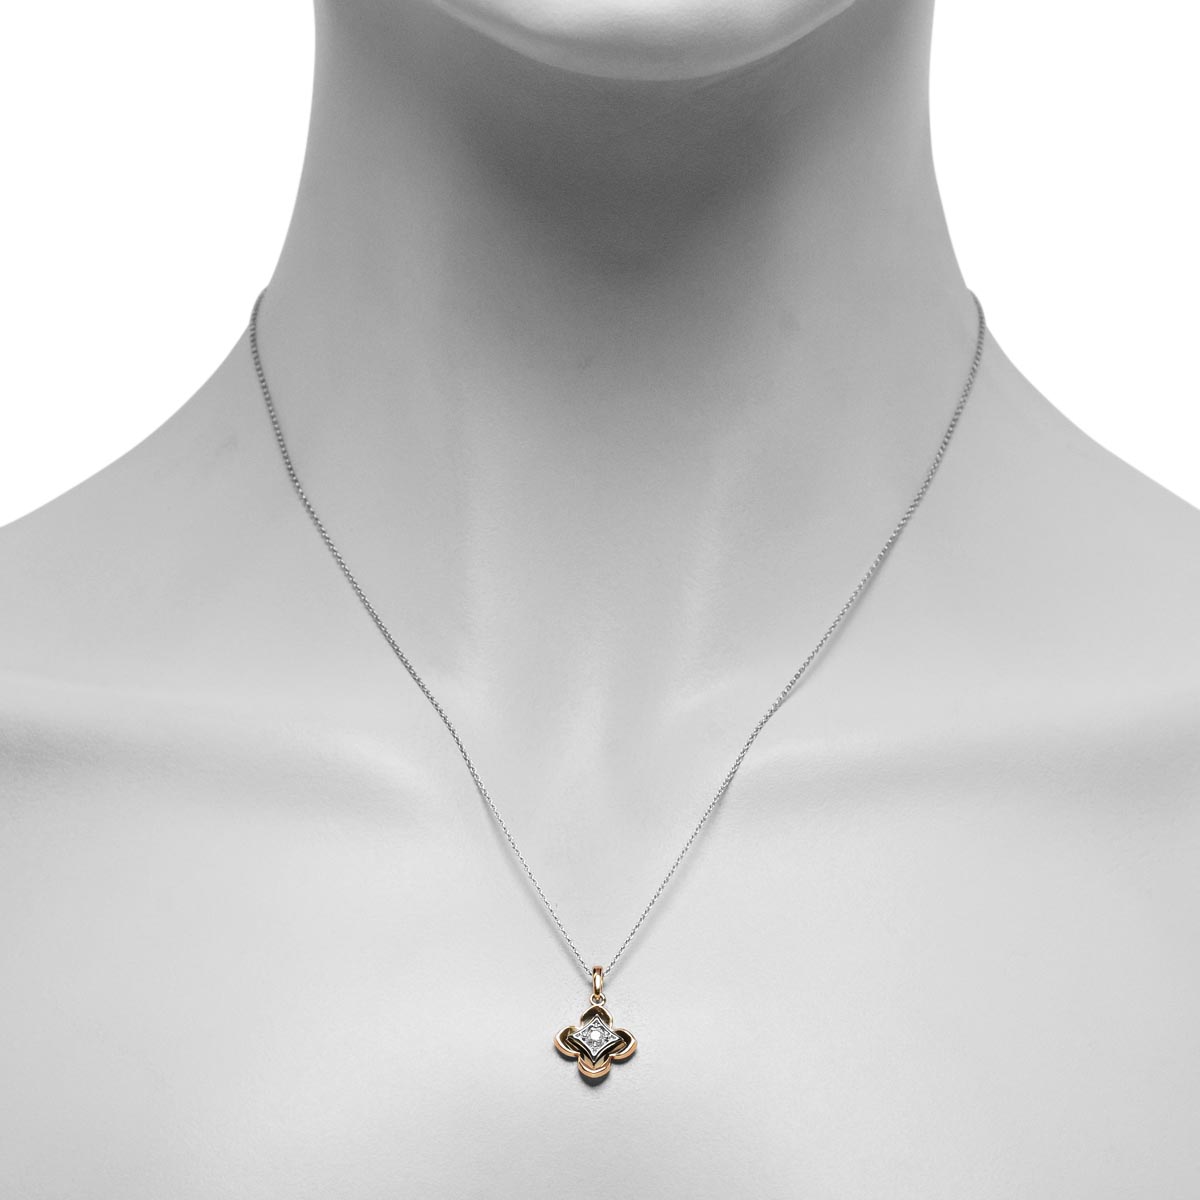 Northern Star Diamond Celestial Collection Necklace in 10kt Yellow and White Gold (1/10ct)